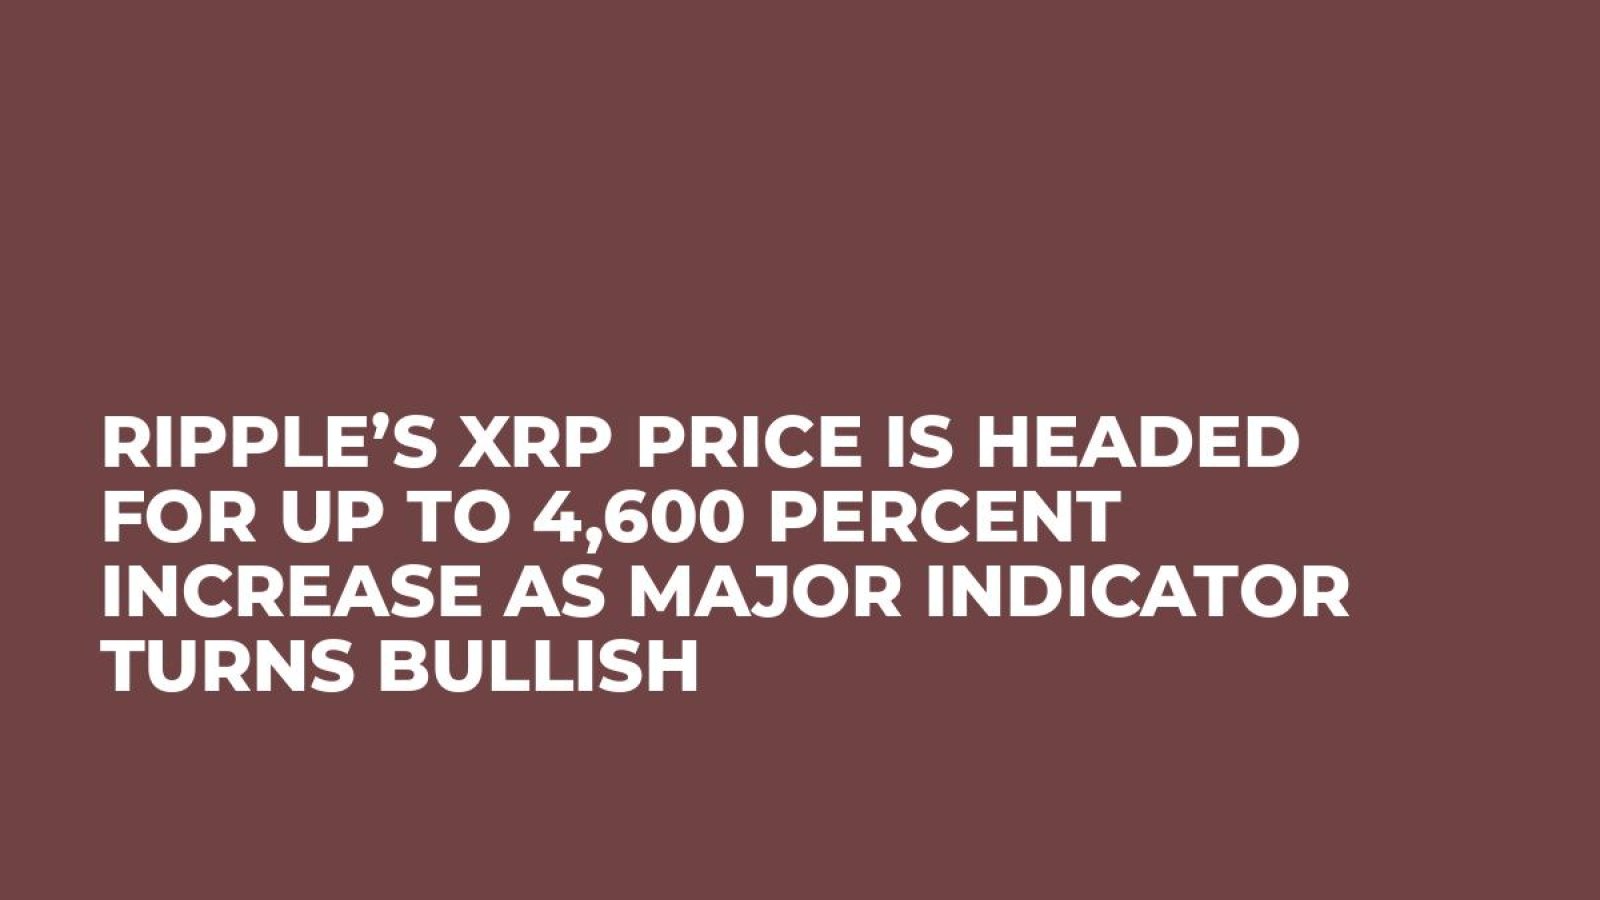 Ripple’s XRP Price Is Headed for Up to 4,600 Percent Increase as Major Indicator Turns Bullish